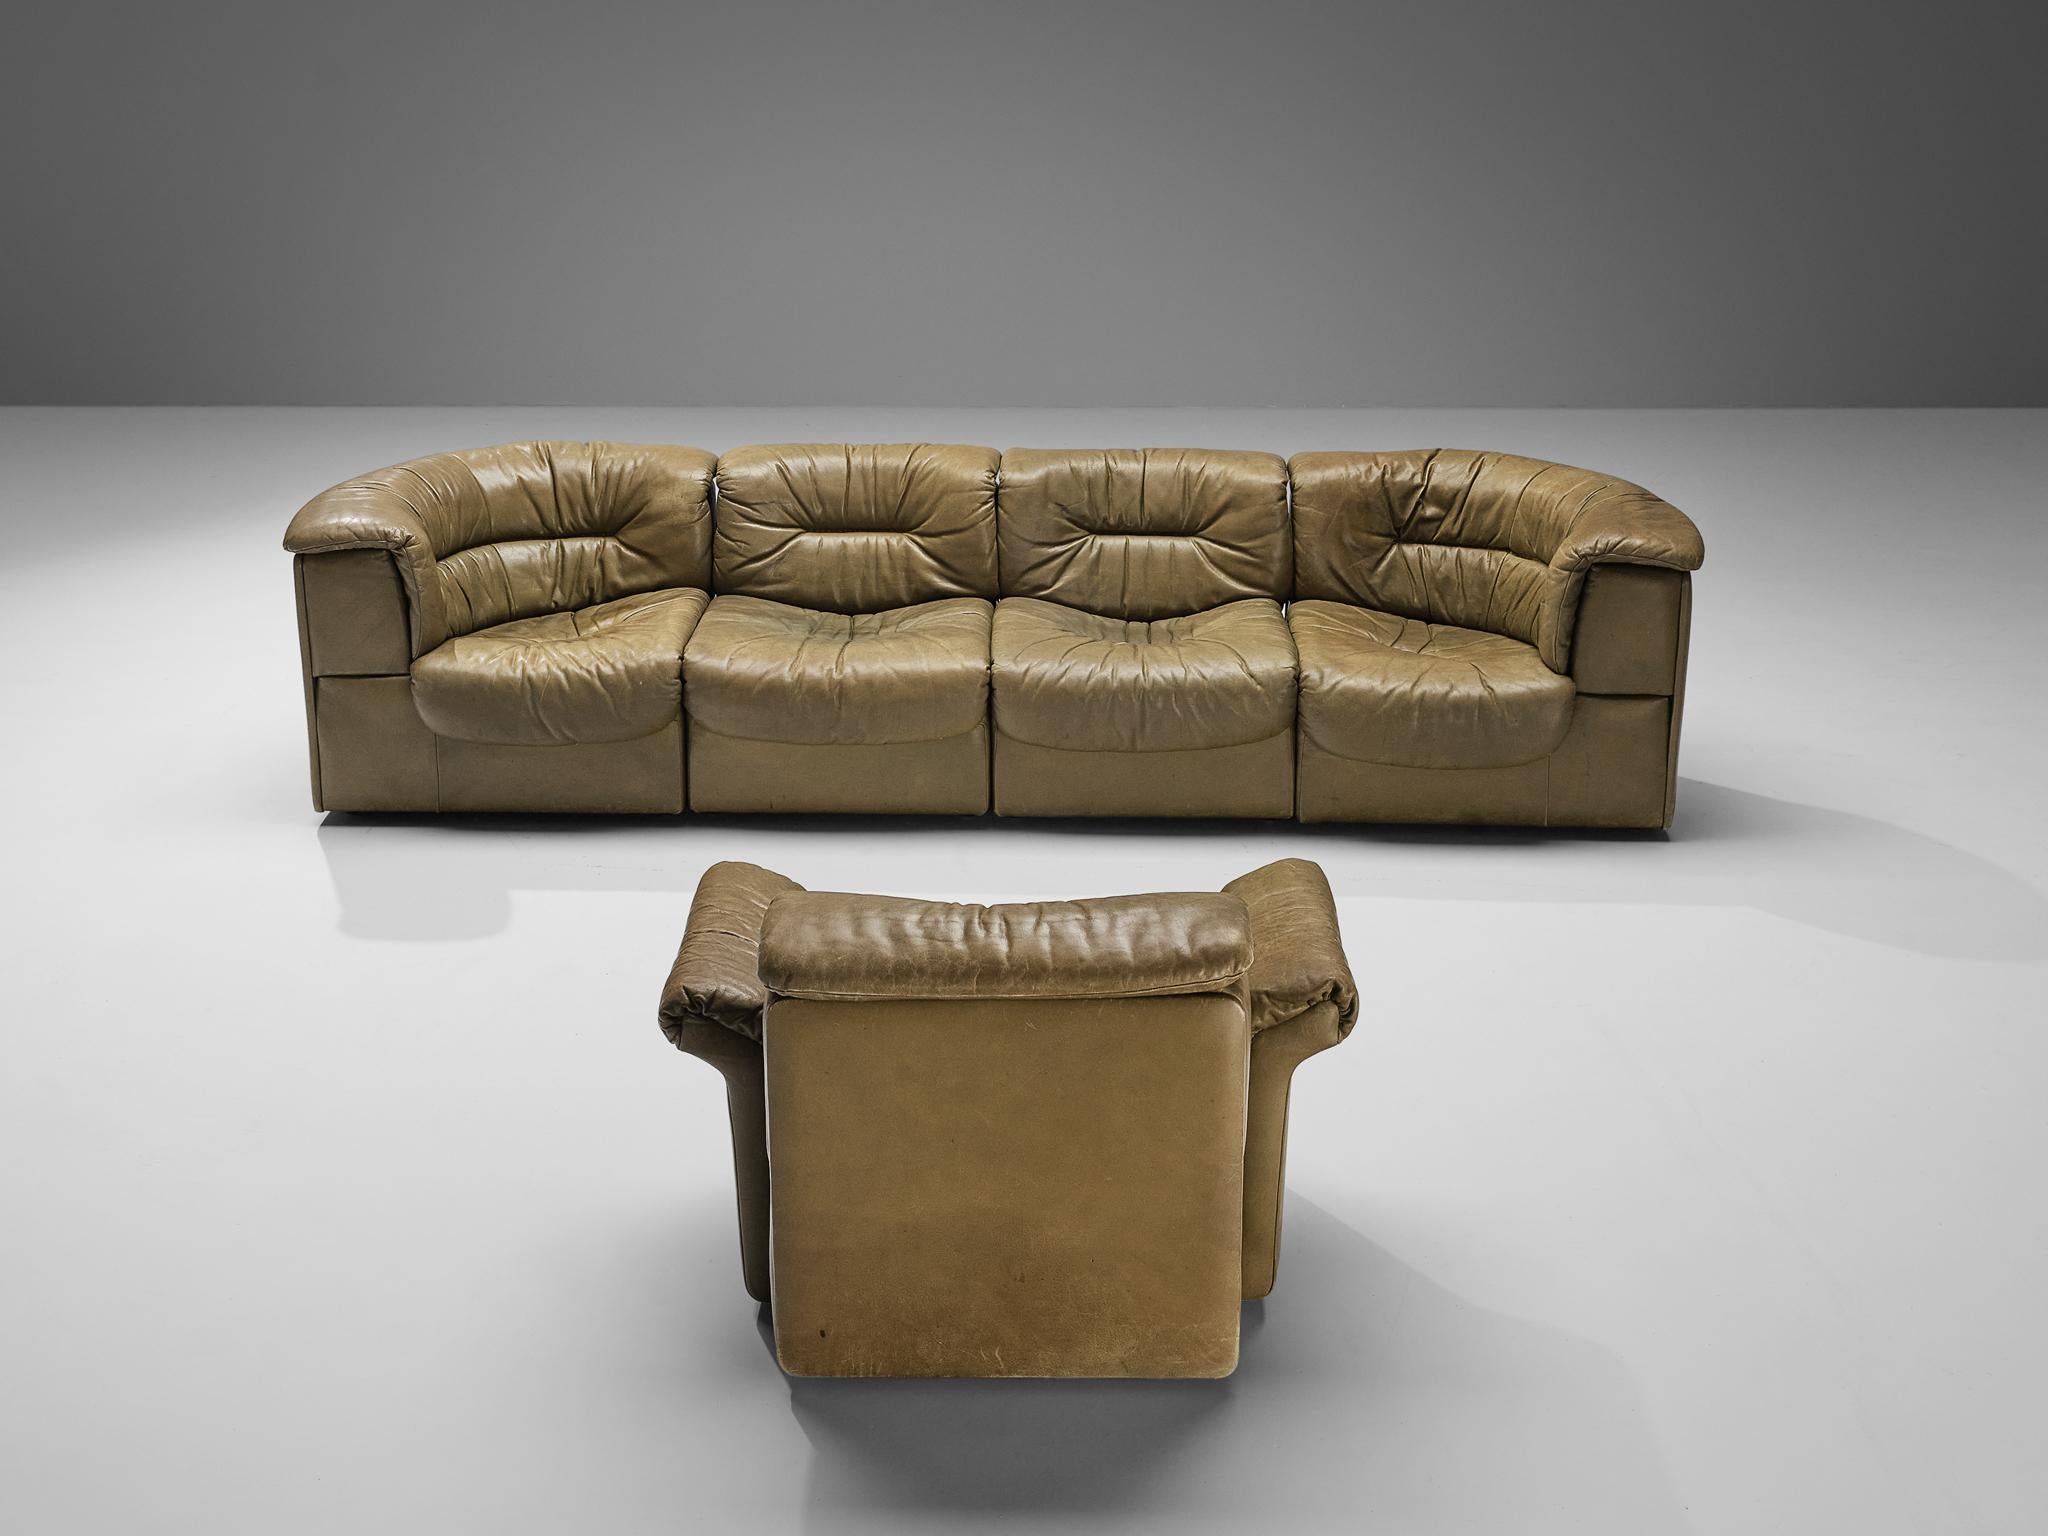 Late 20th Century De Sede 'DS-14' Modular Sofa in Patinated Olive Green Leather